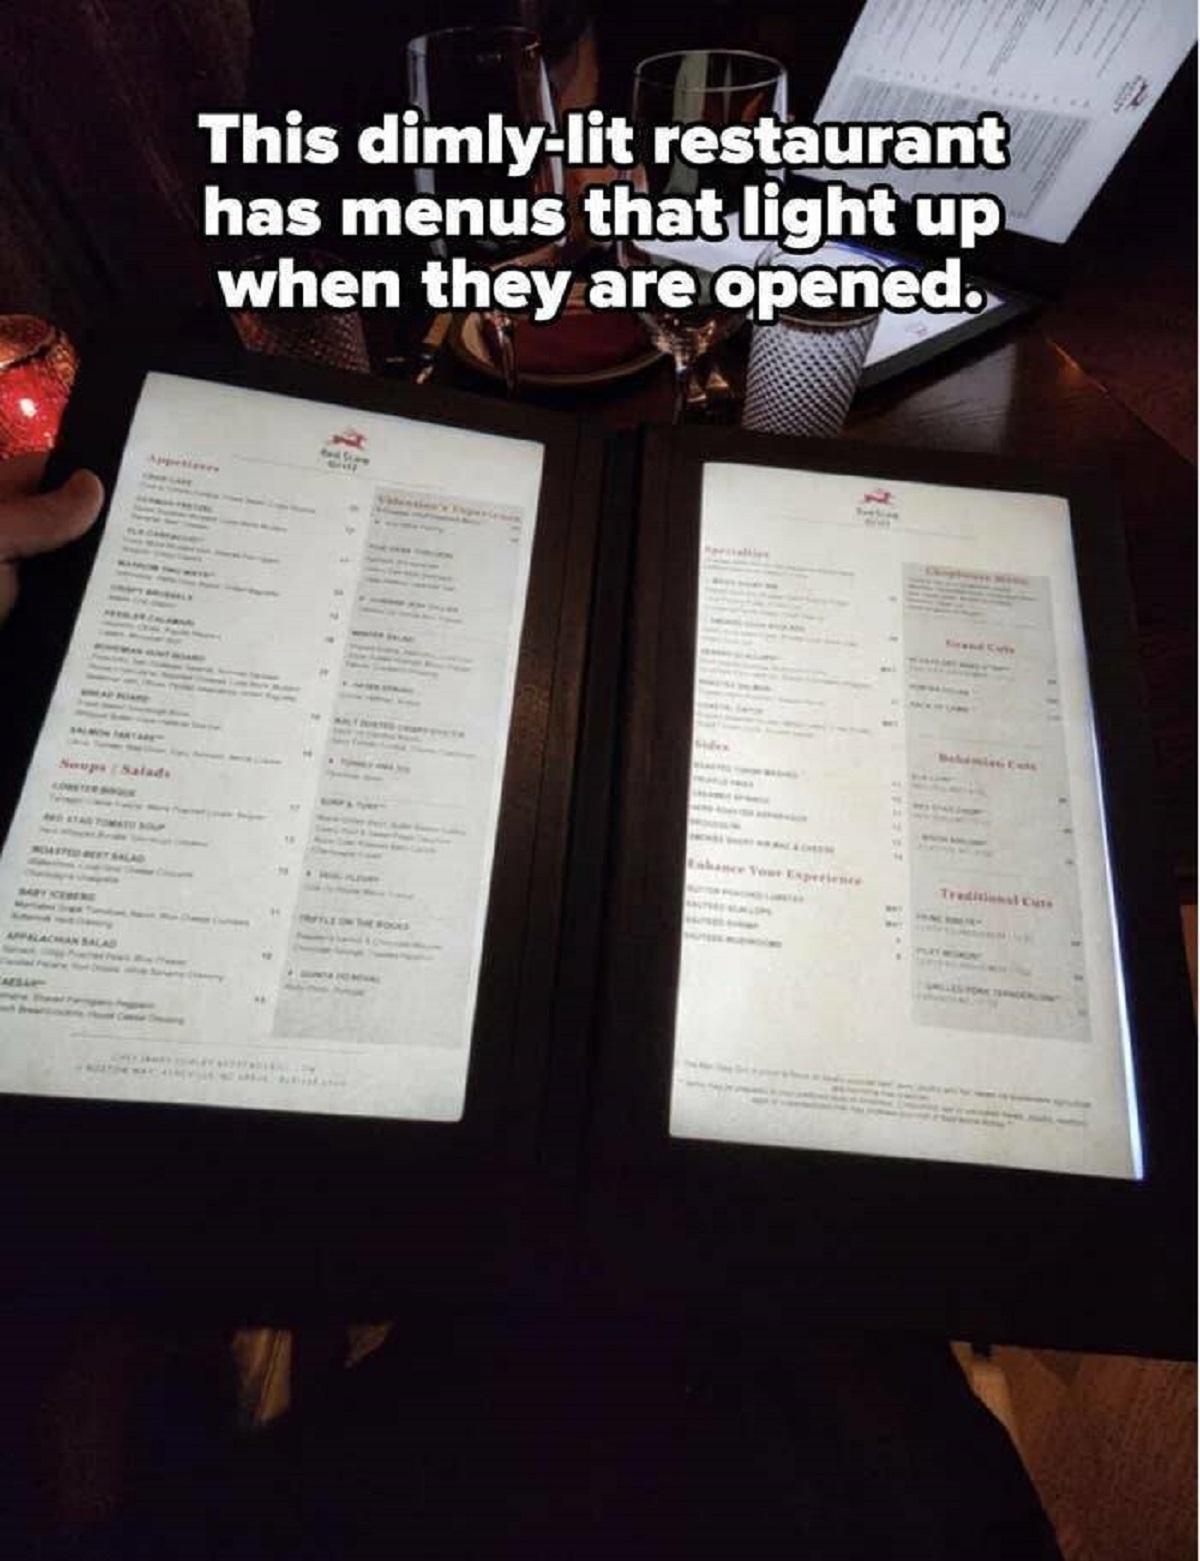 document - This dimlylit restaurant has menus that light up when they are opened. Appetianes Soups Salads 2 ance Your Experience Traditional Cus